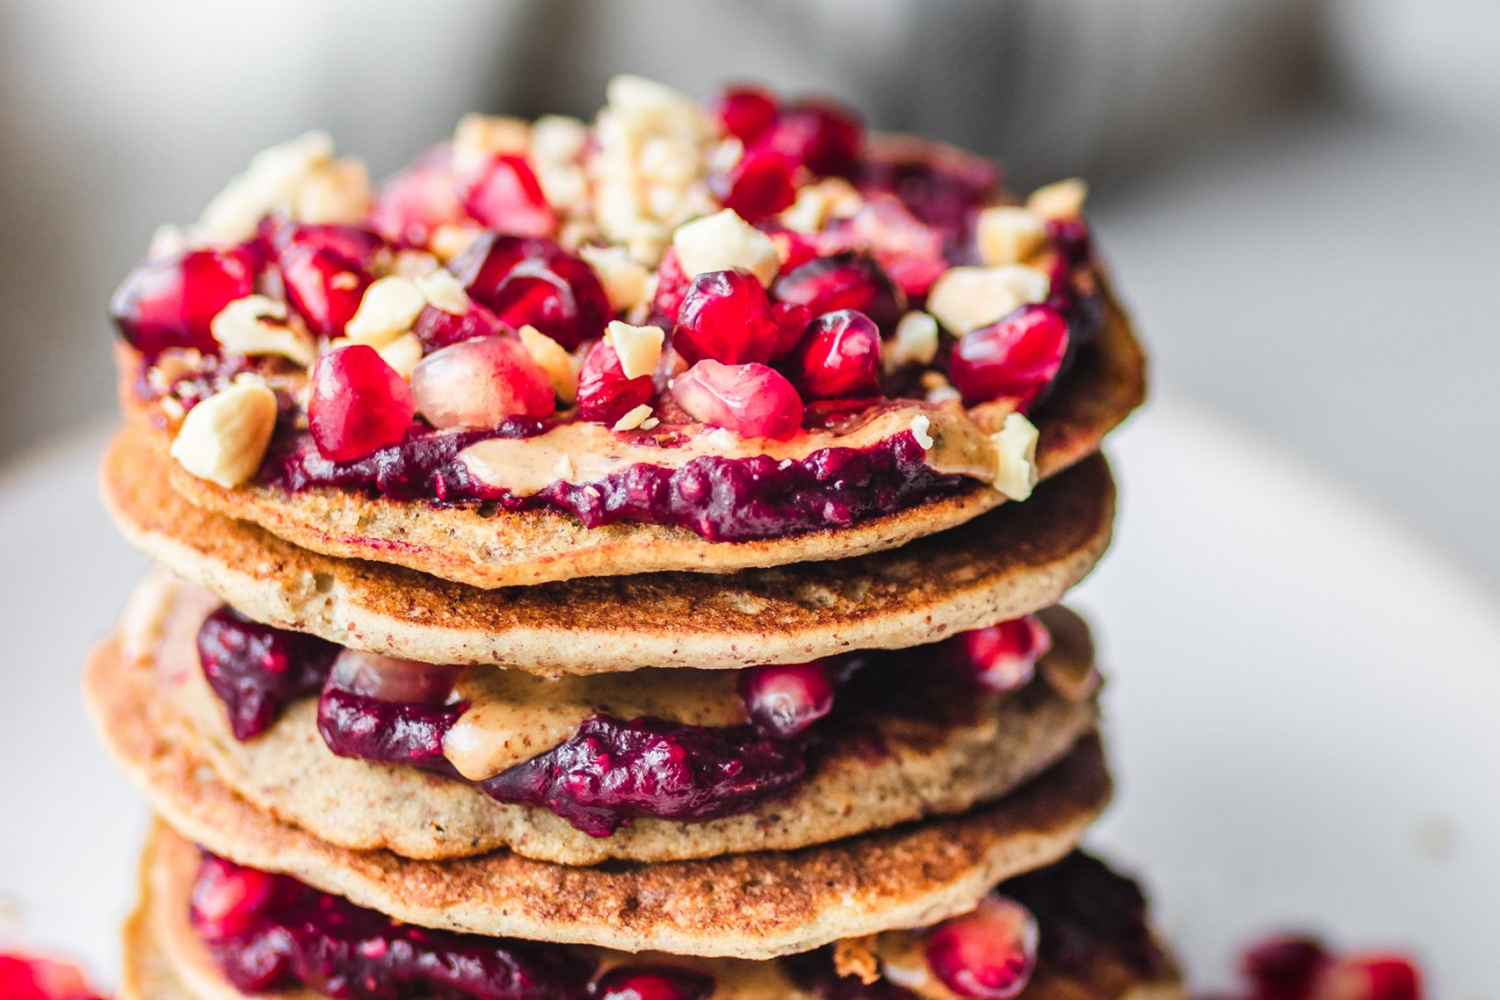 The Fluffiest Gluten Free Sugar Free Pancakes Stacked with berries and nut butter